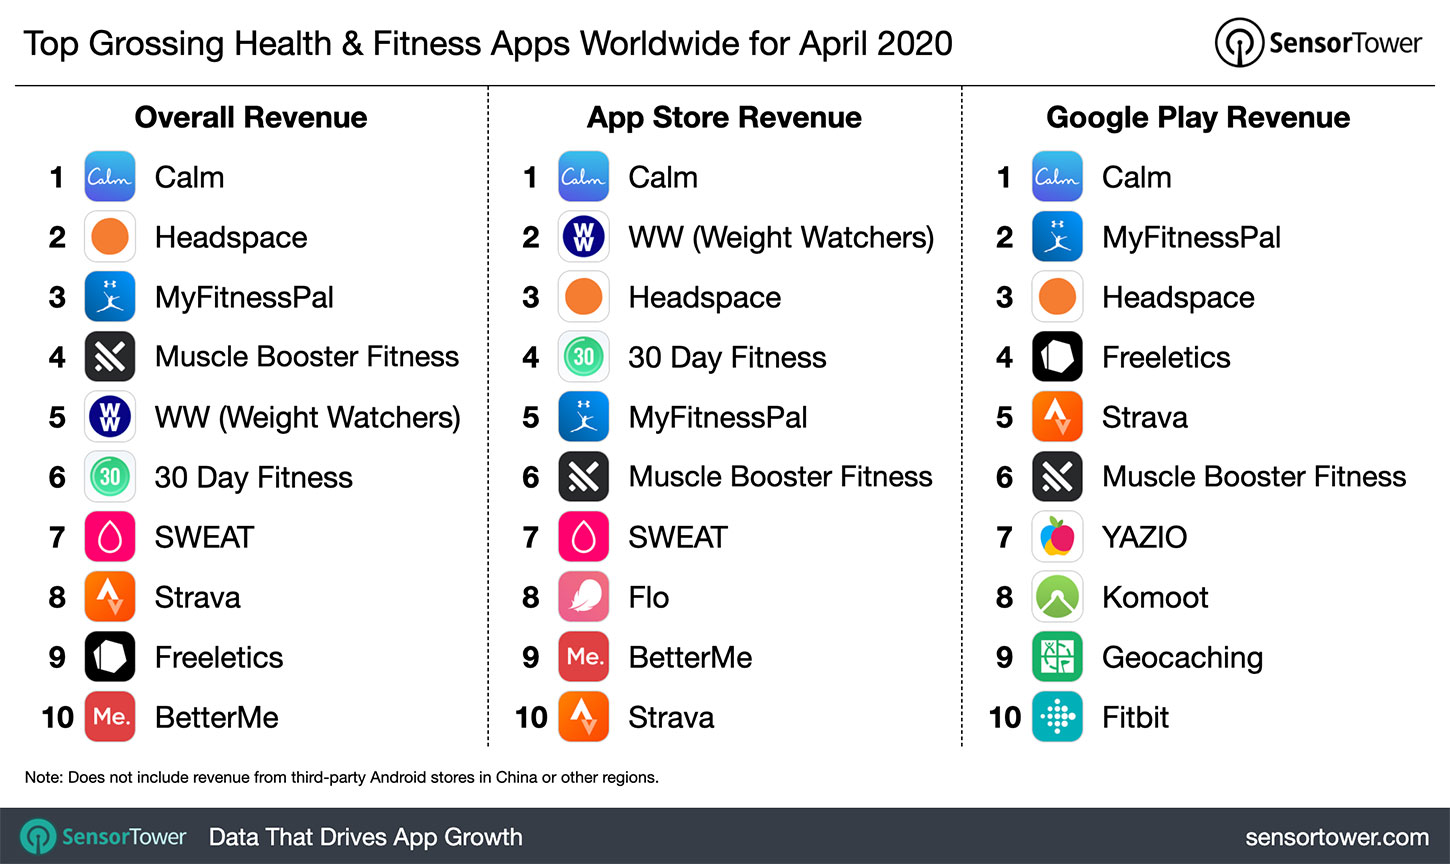 “Top Grossing Health & Fitness Apps Worldwide for April 2020